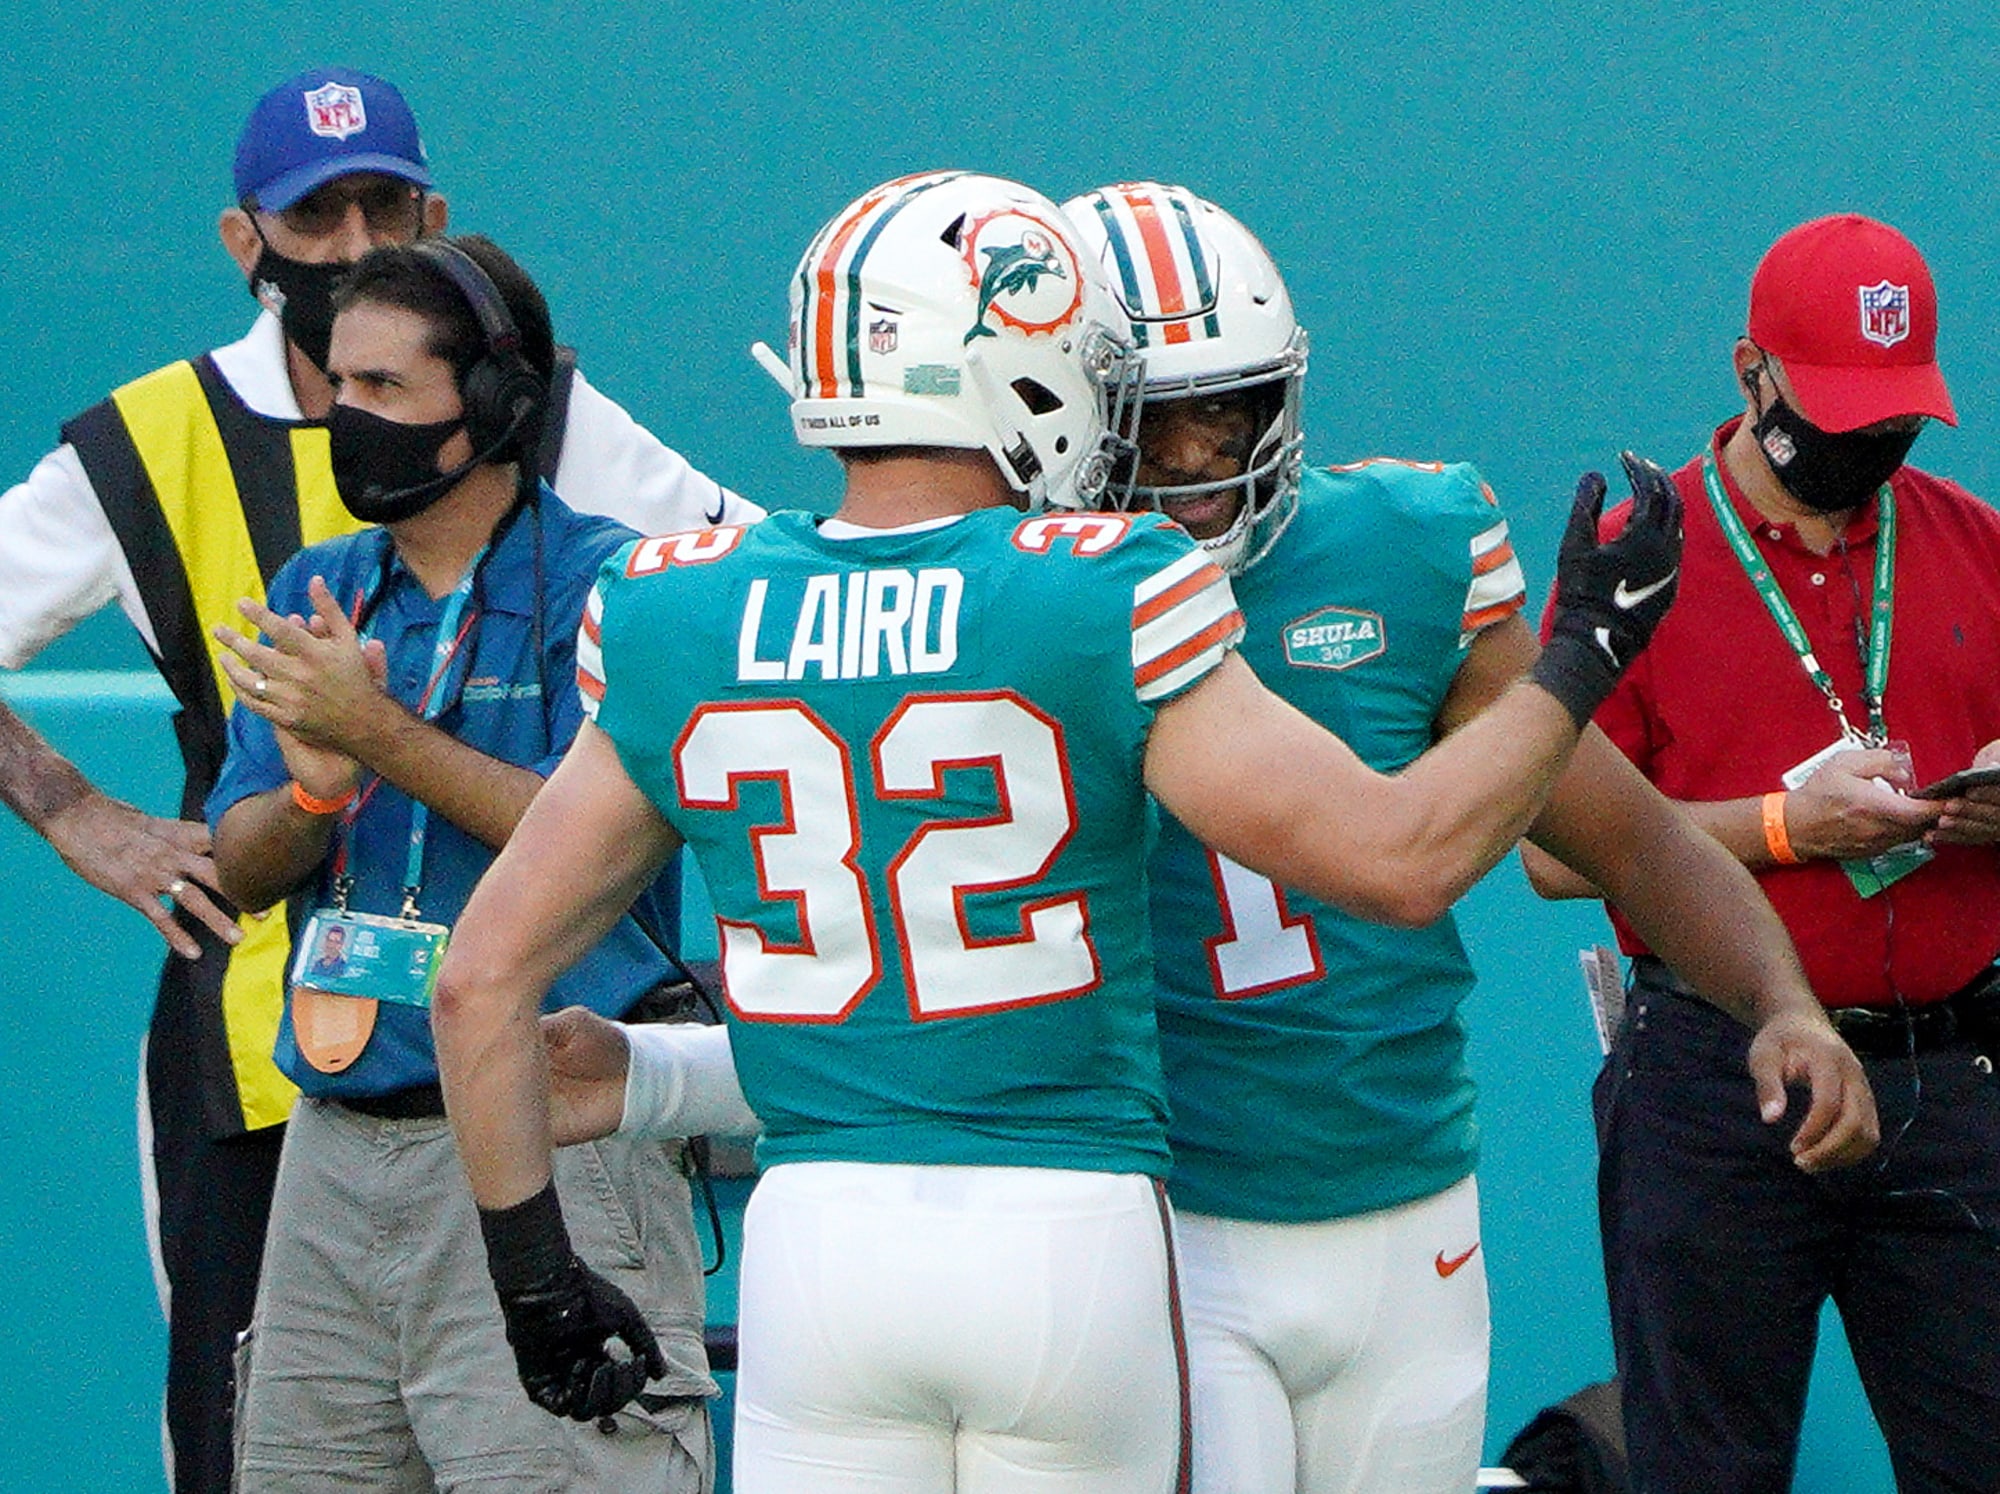 The best running backs on the Miami Dolphins roster ranked last to first